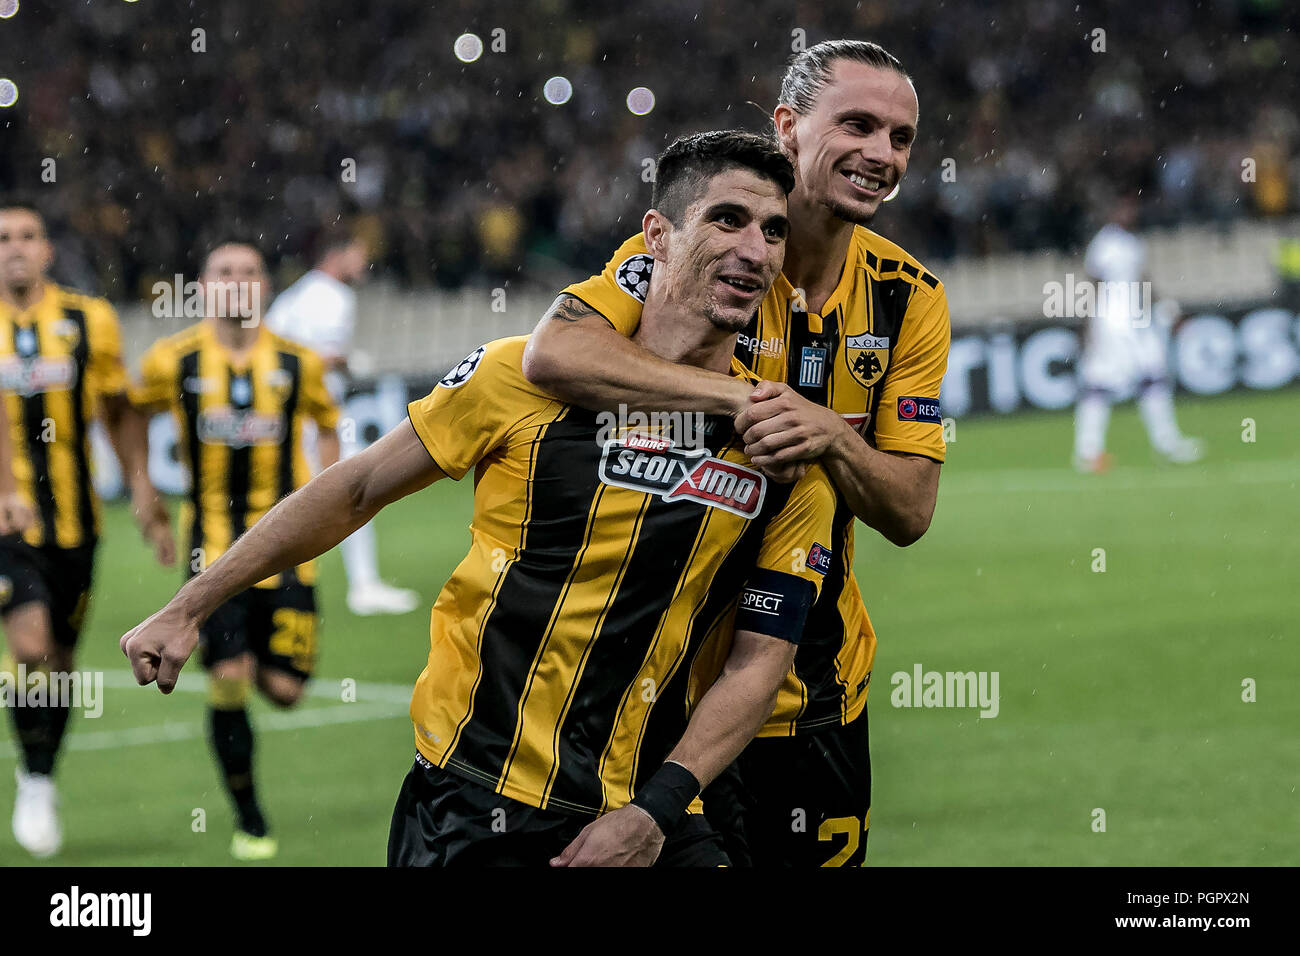 Page 3 - Aek Fc High Resolution Stock Photography and Images - Alamy